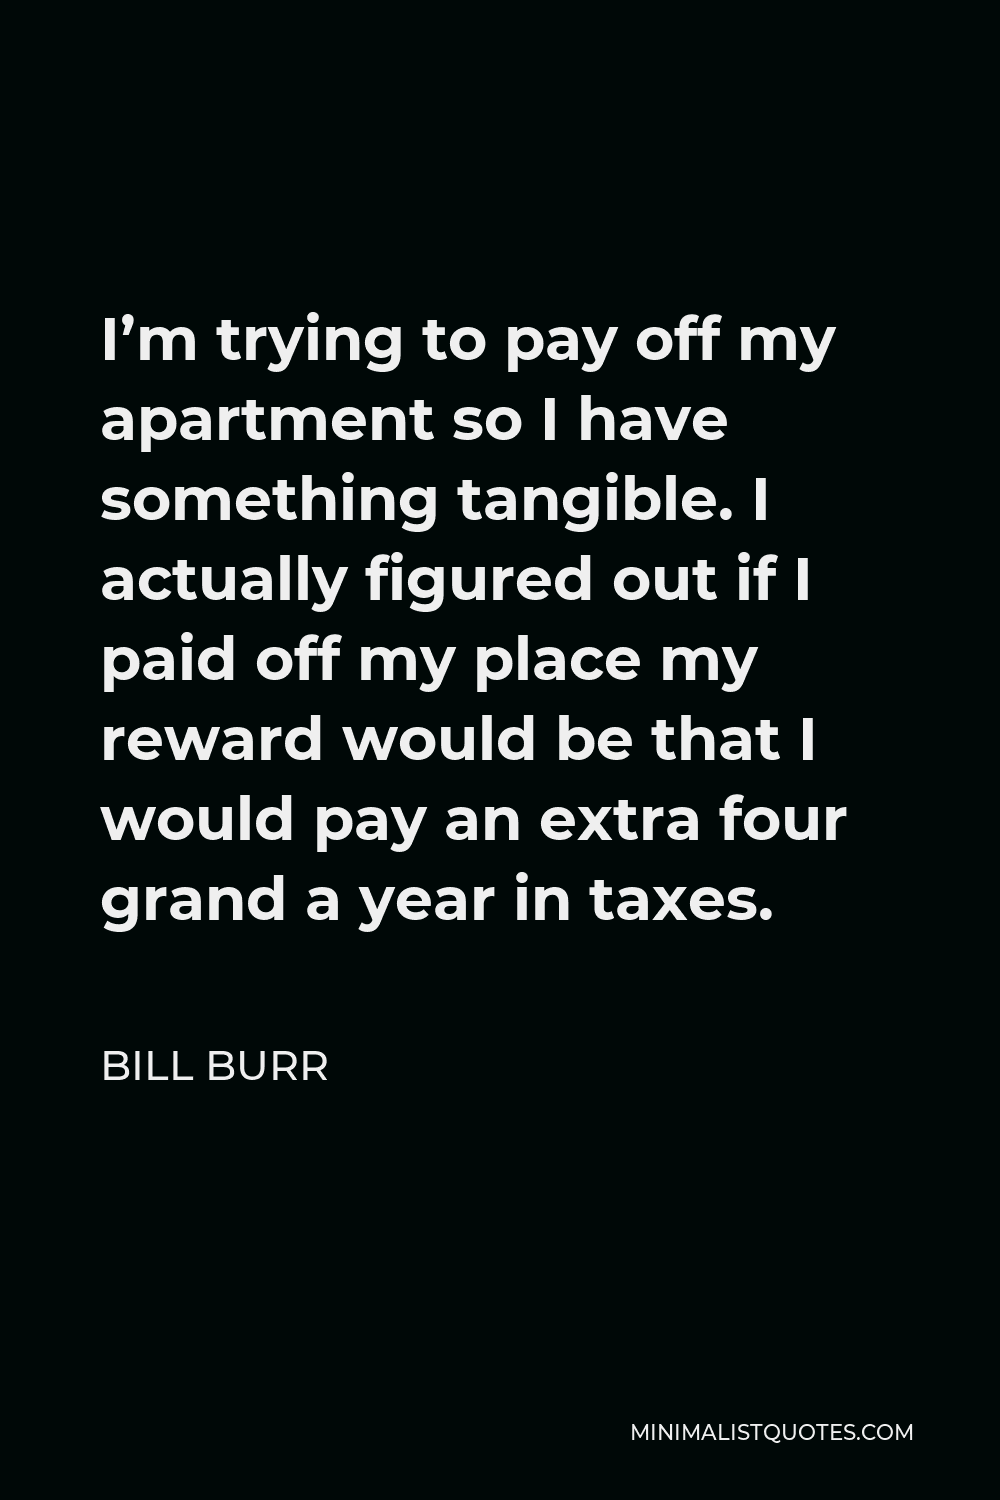 Bill Burr Quote - I’m trying to pay off my apartment so I have something tangible. I actually figured out if I paid off my place my reward would be that I would pay an extra four grand a year in taxes.